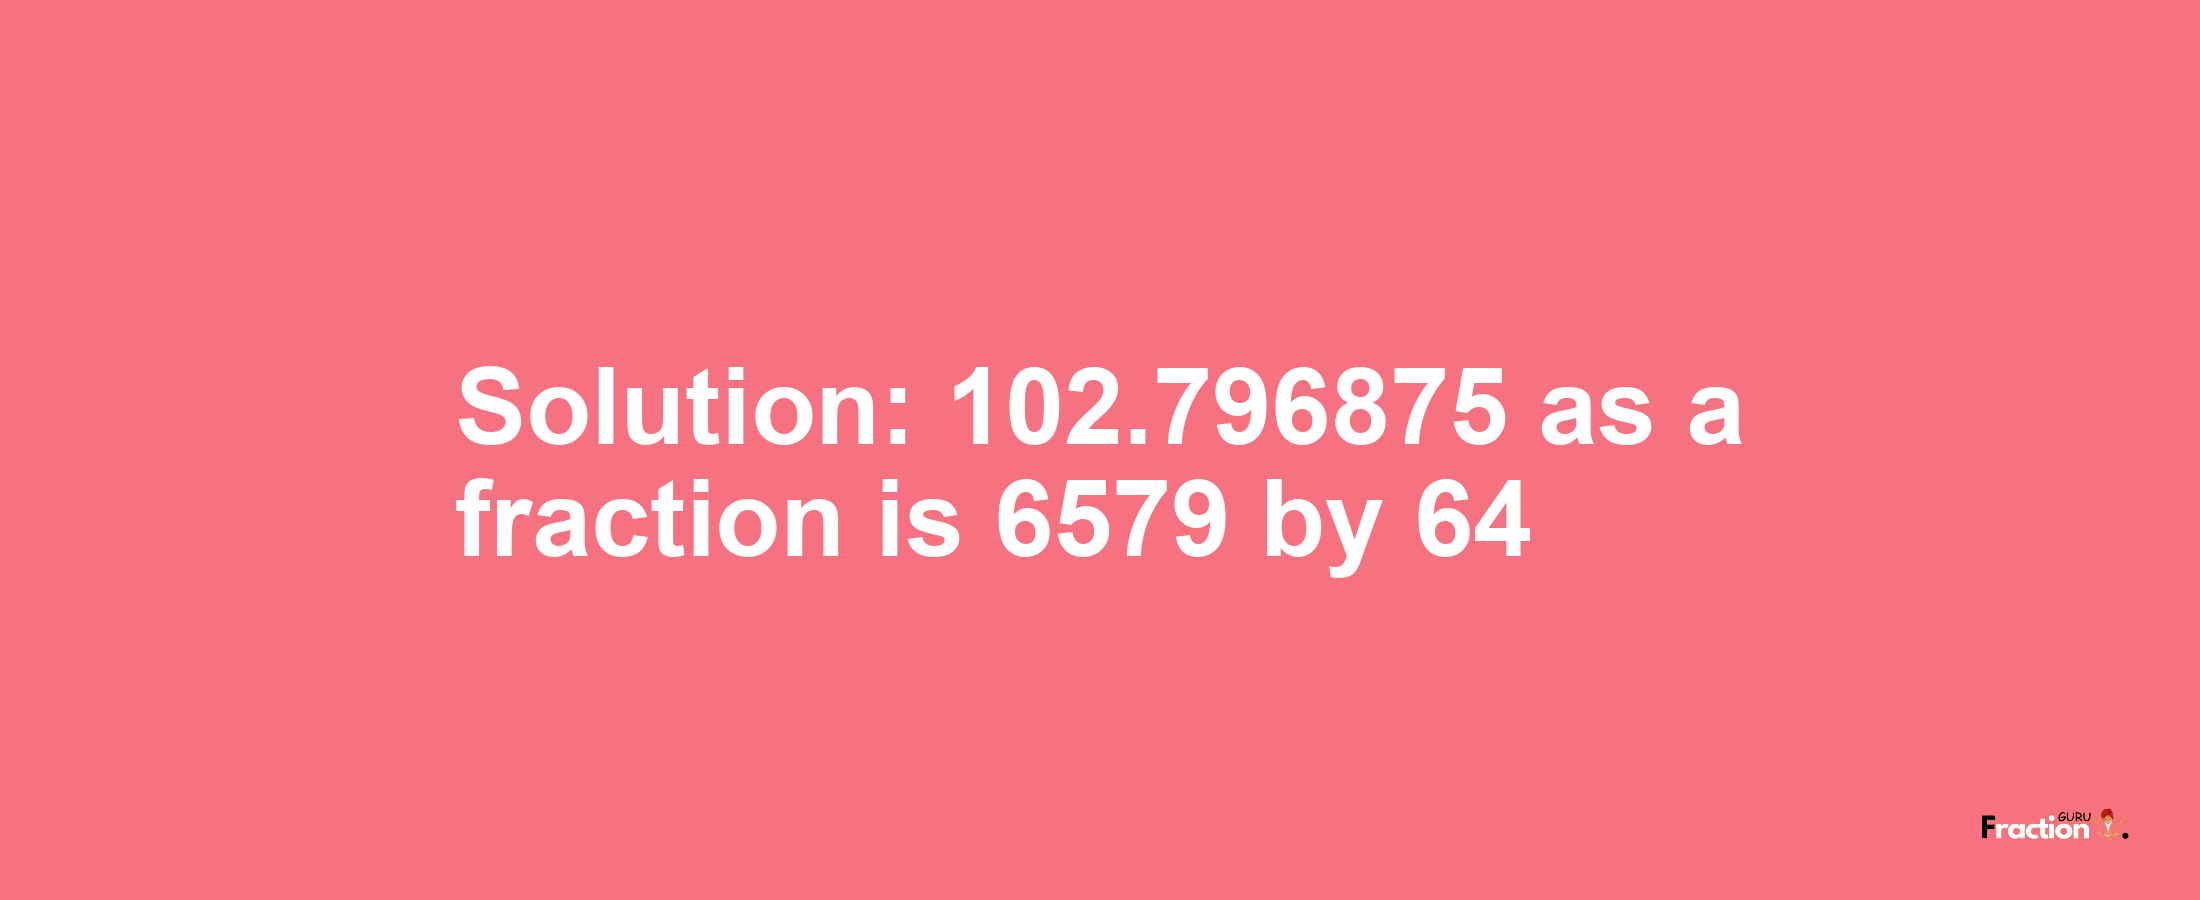 Solution:102.796875 as a fraction is 6579/64